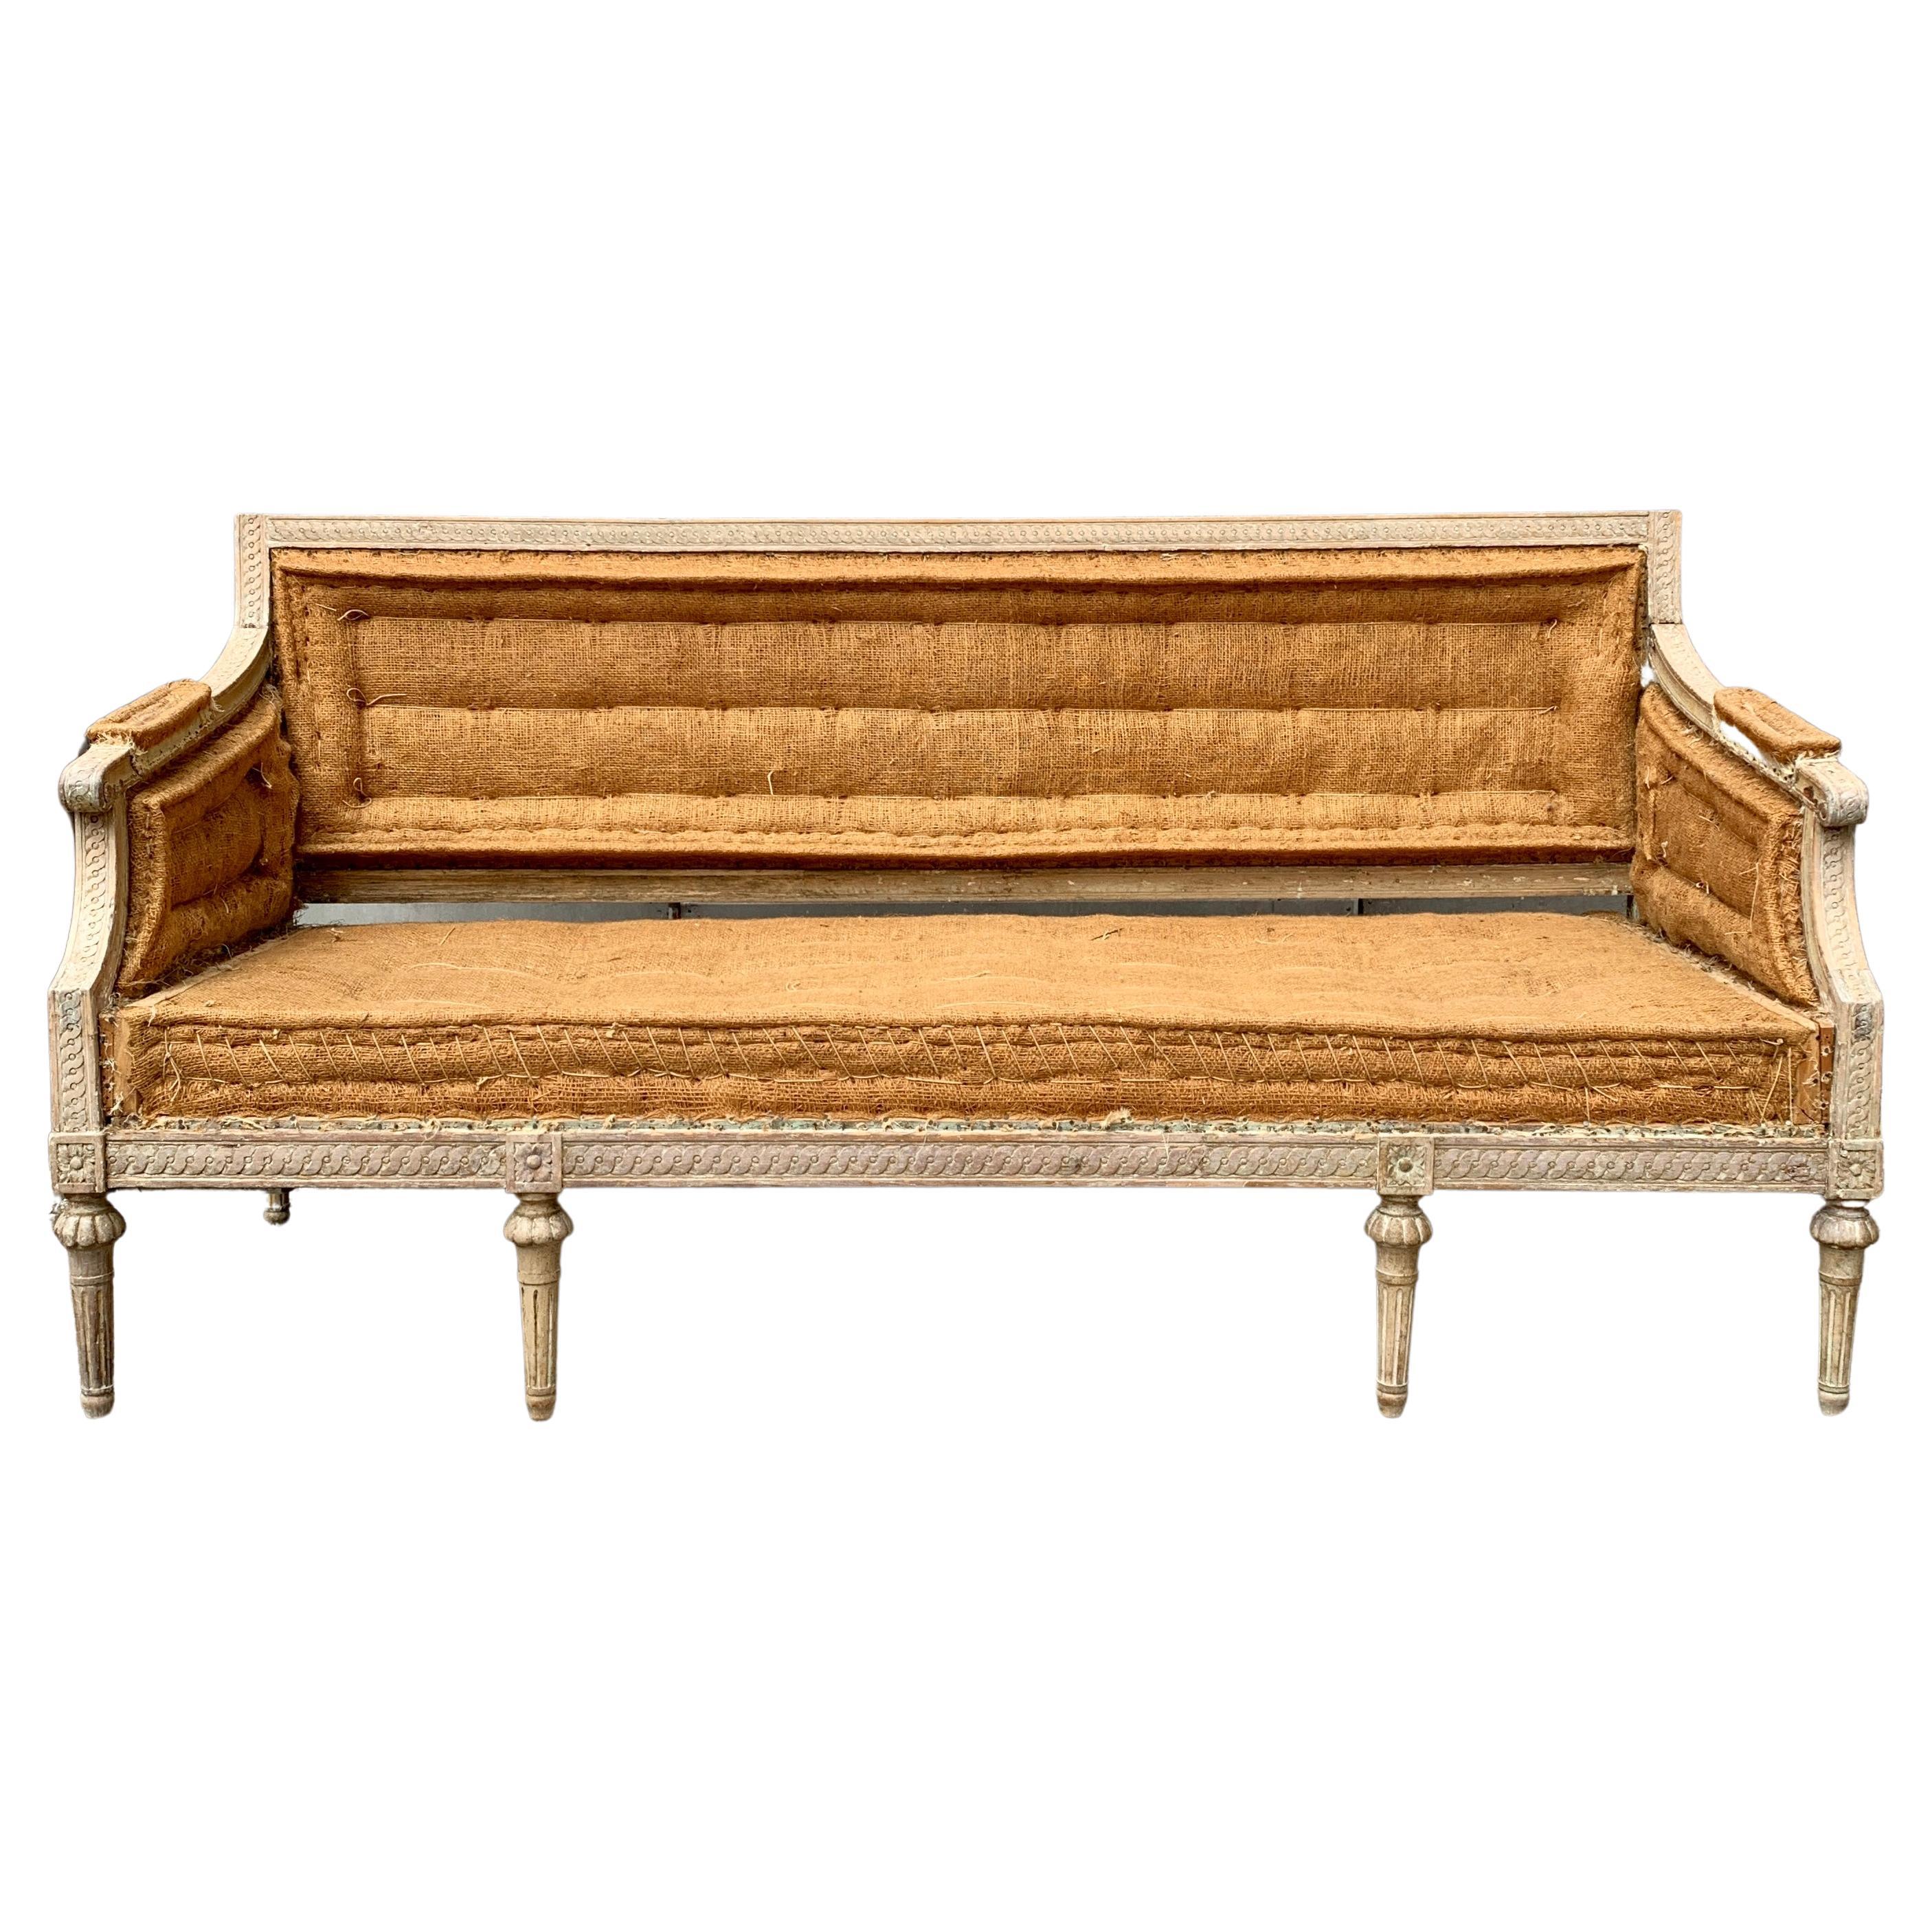 Swedish Late 18th century sofa or settee bench with old grey paint and the Unbeatable Original Patina. 
The sofa has been carefully and professionally hand-scraped in order recover the original paint, the was done by our highly specialized